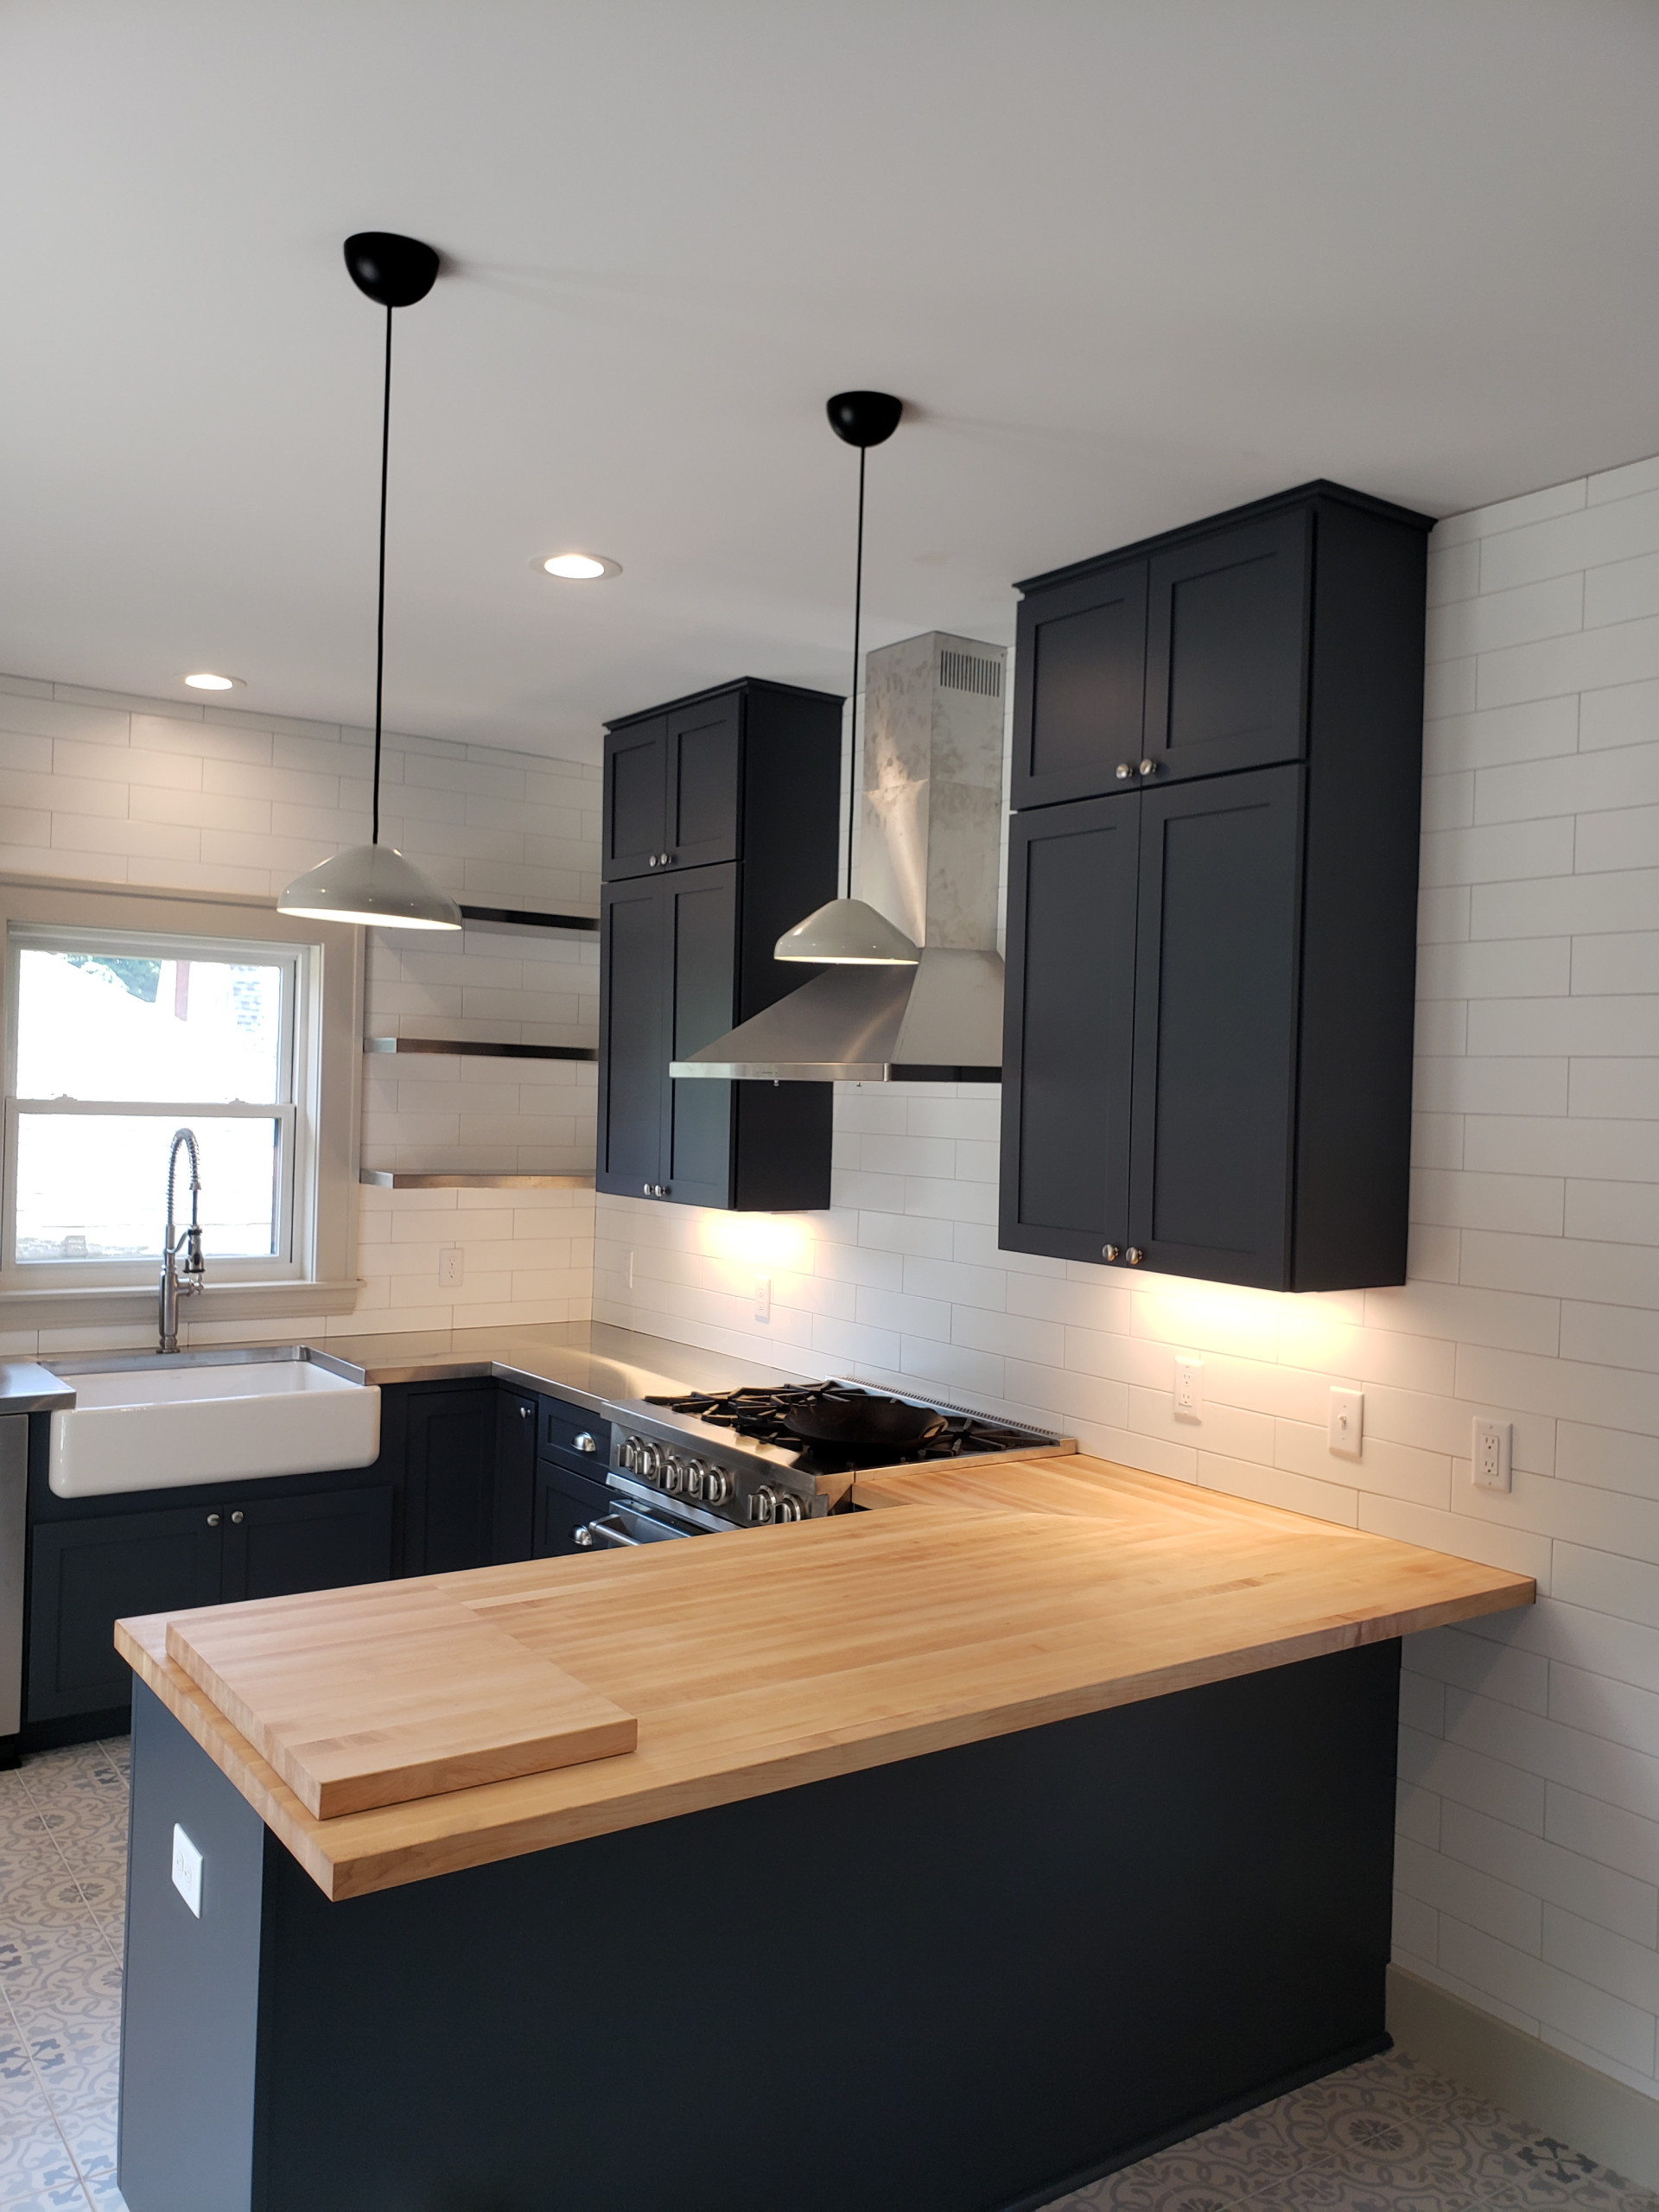 This kitchen remodel was part of a larger project we completed for this client. Their goal was to put an addition on the existing home, increase the kitchen size, add a half bathroom, and rework the s